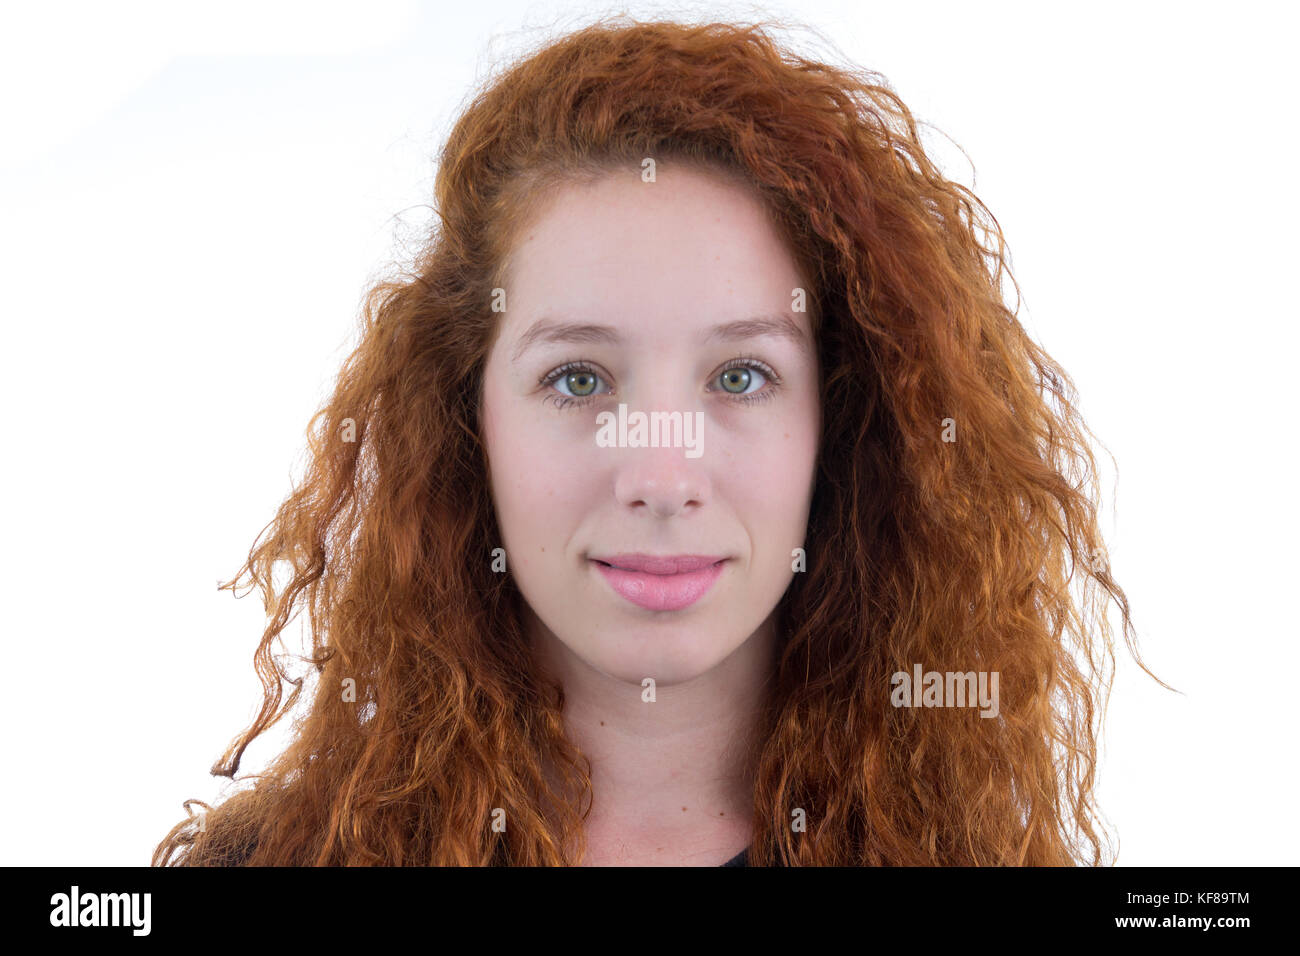 Girl looks at the camera. Shy. The person is redheaded and young. White ...